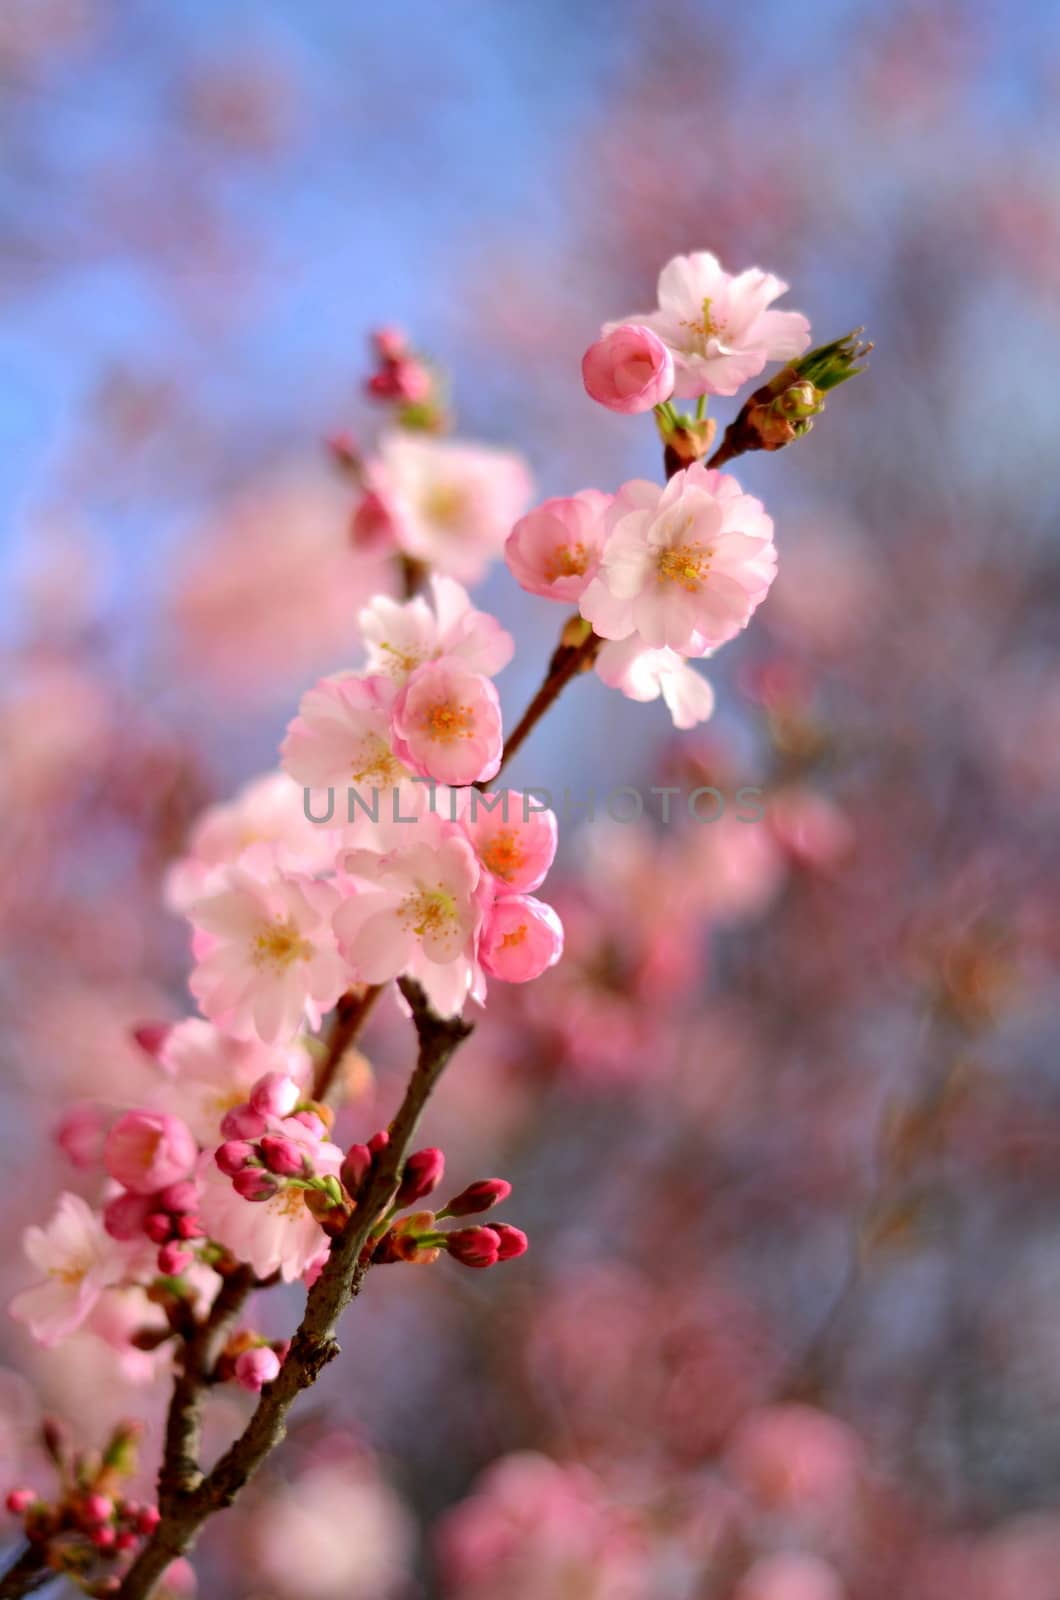 Spring Image Of Pink Blossom Flower With Shallow Depth Of Focus